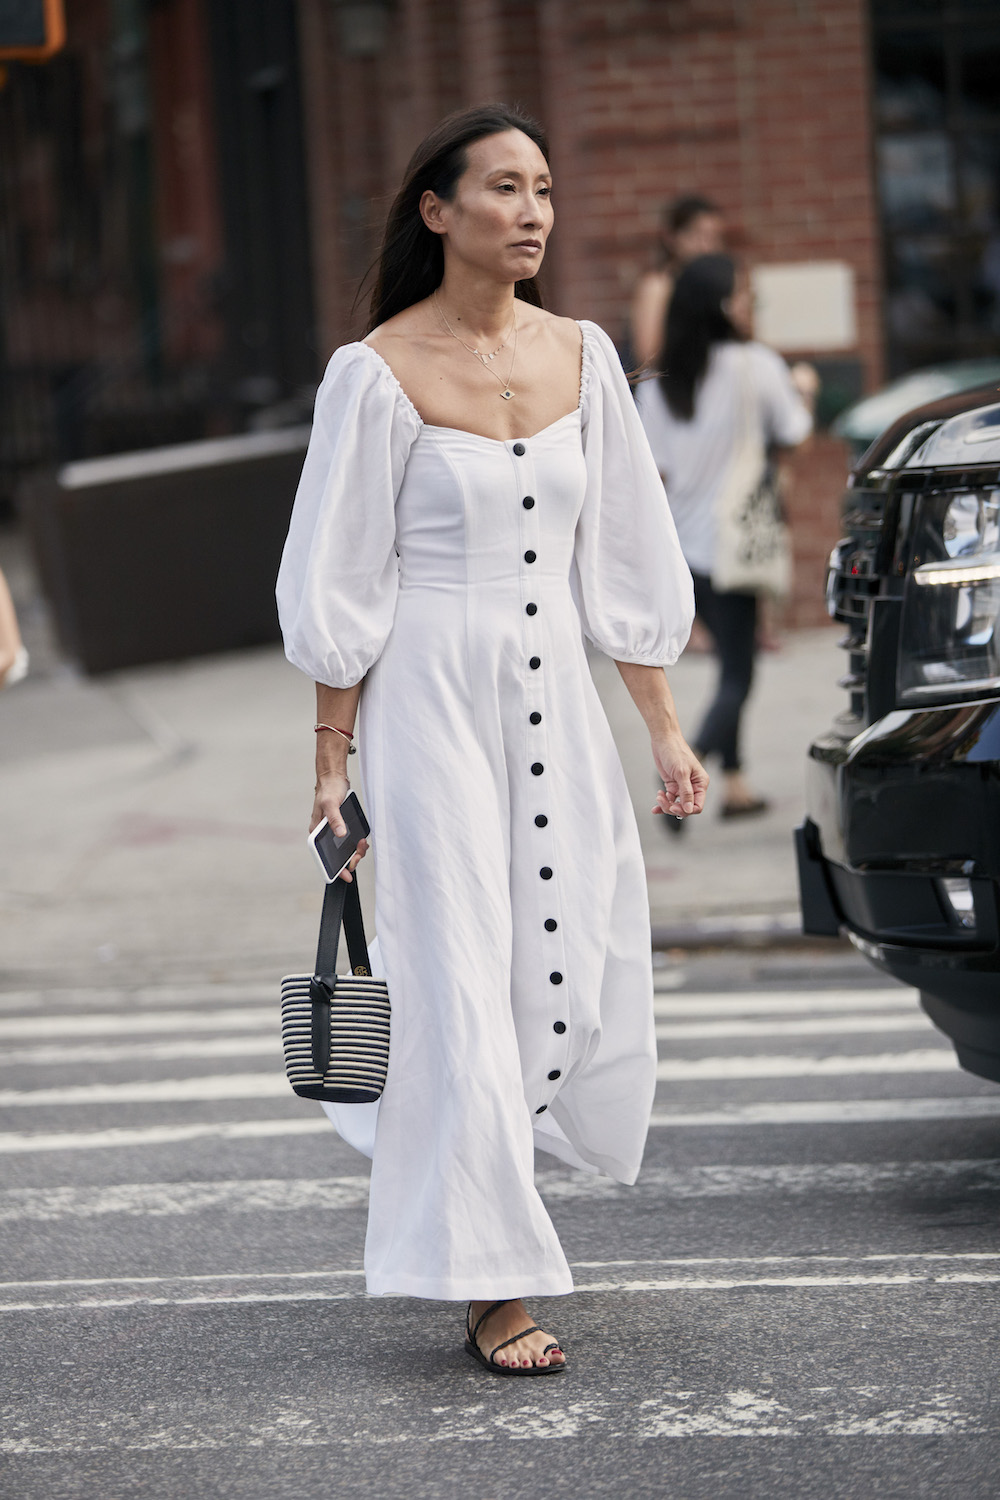 Proof Puffed Sleeves May Be the Next Trend #7